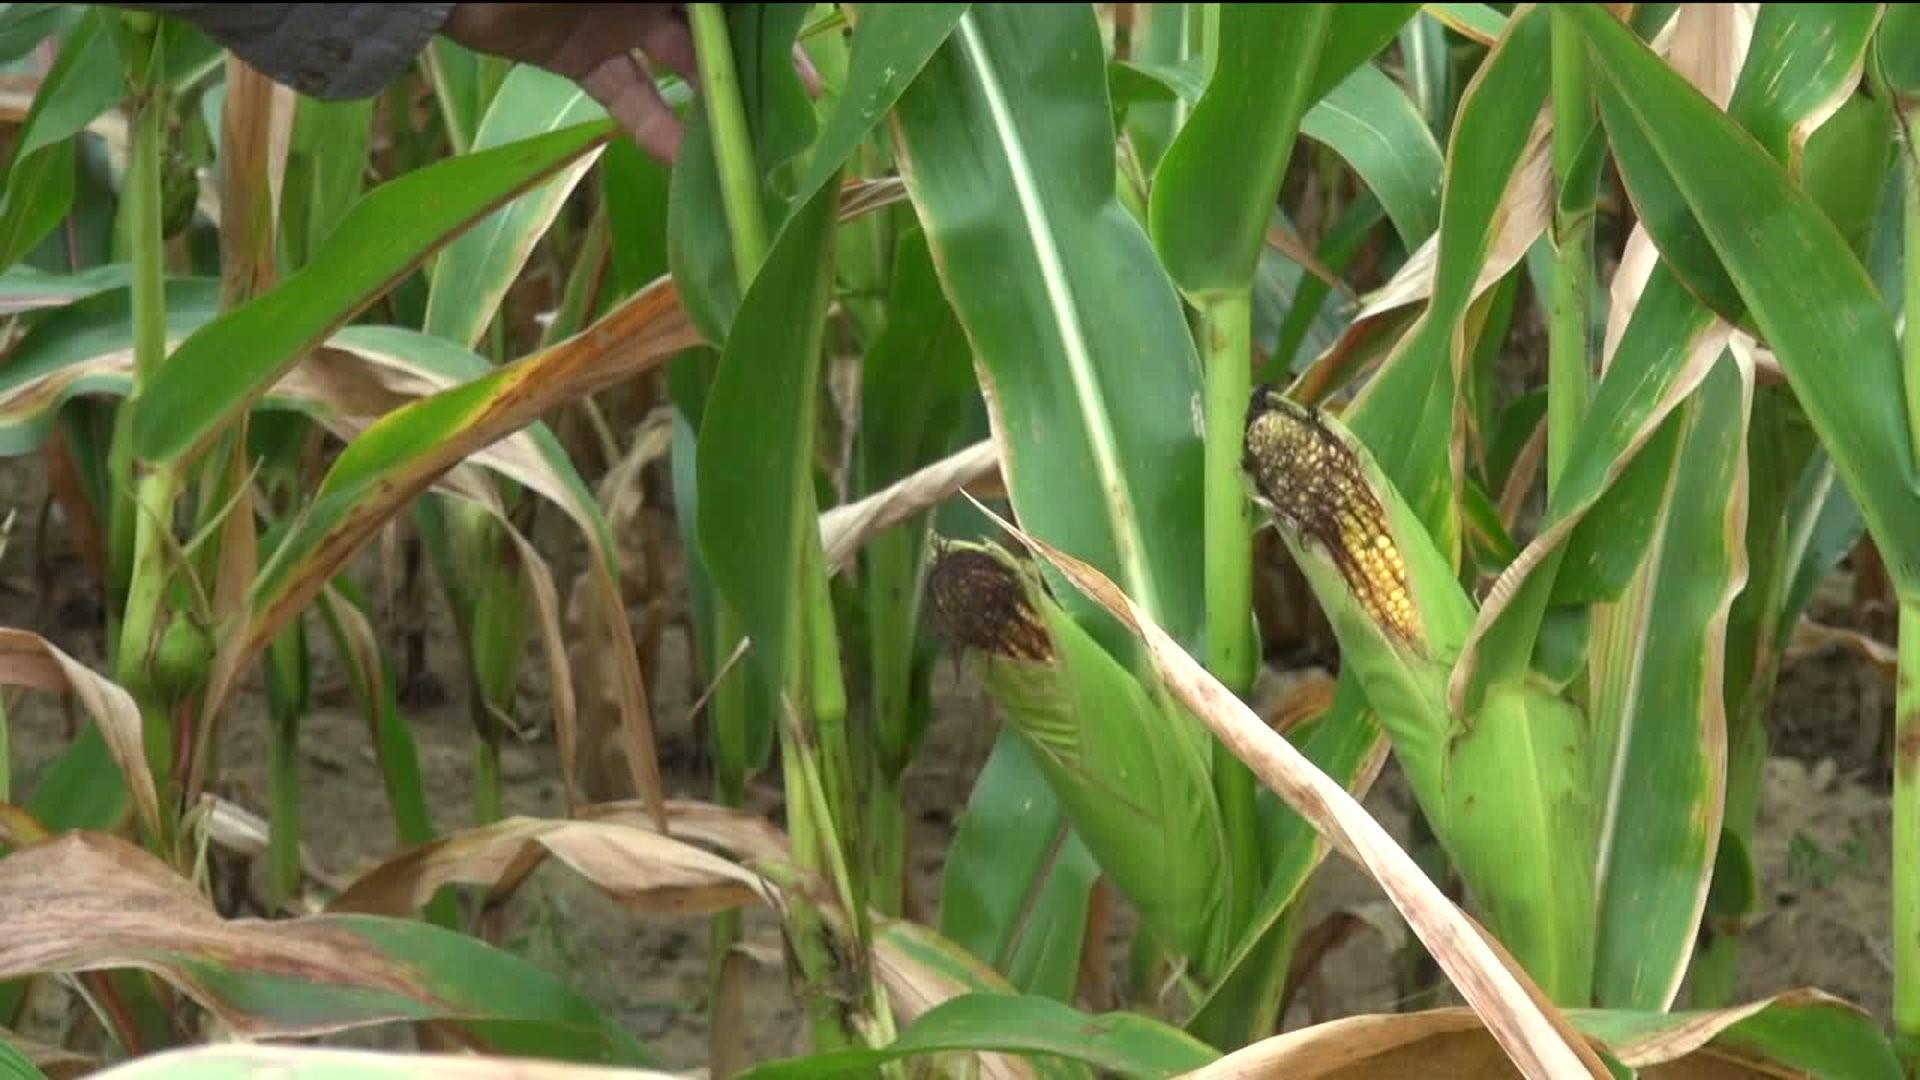 Almost all of Africa’s maize crop is at risk from devastating fall armyworm pest, study reveals